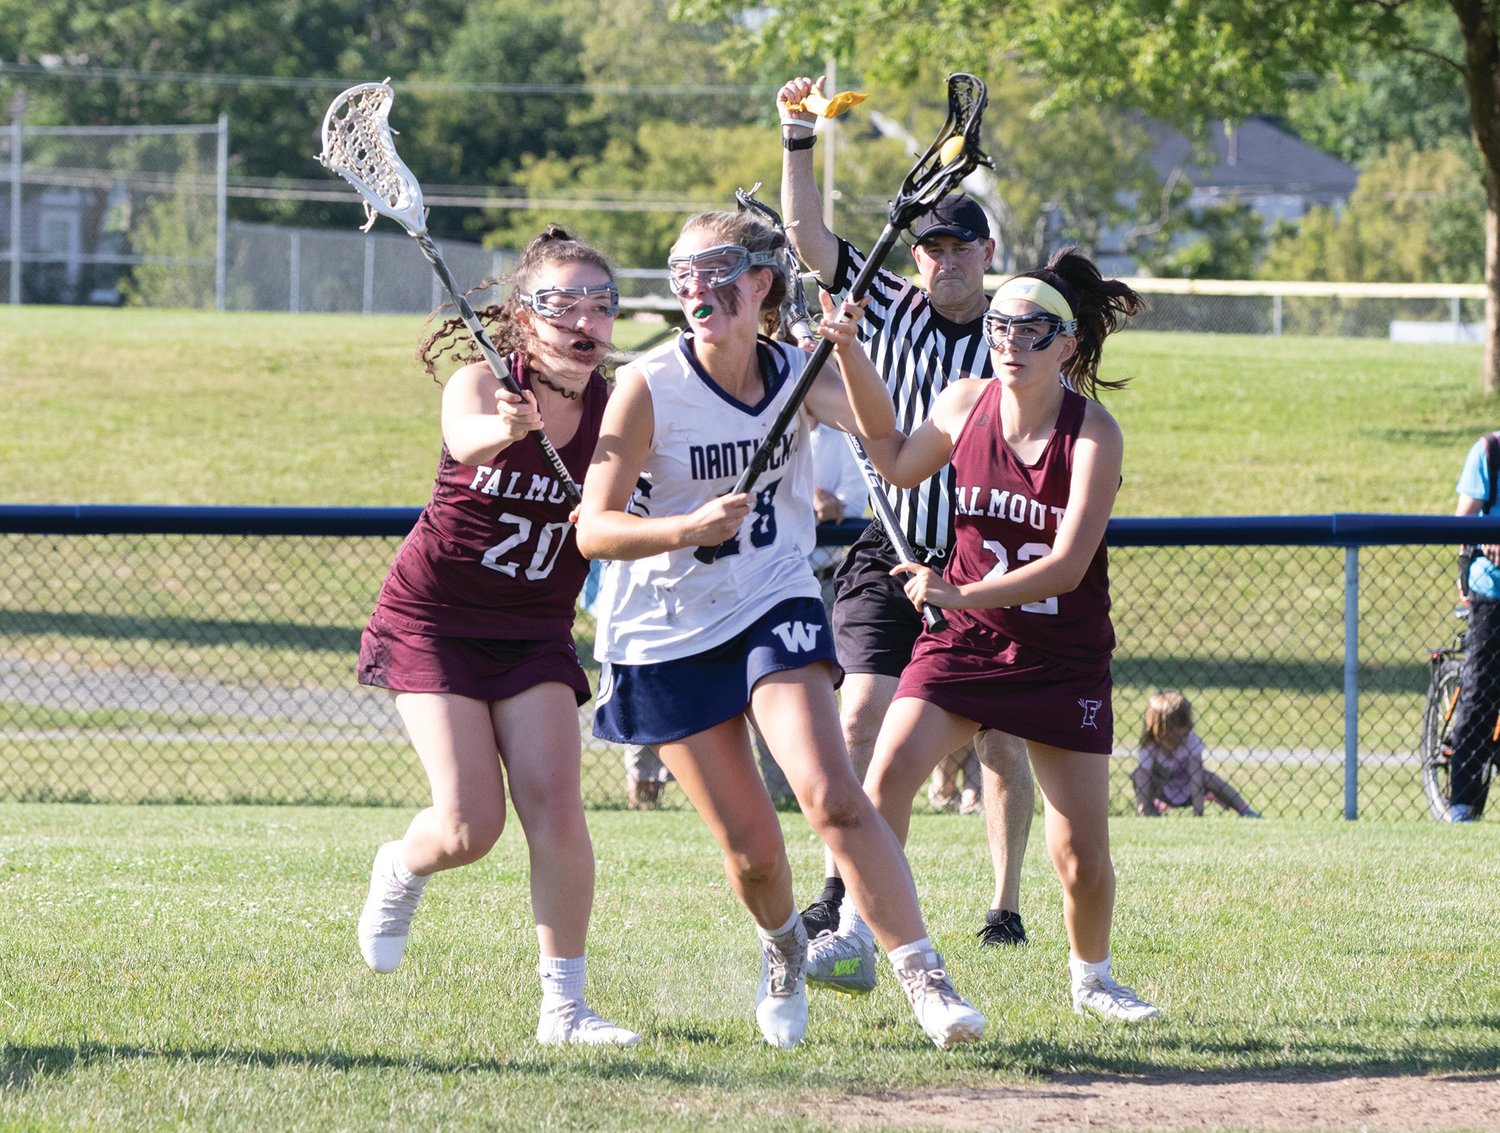 Ava Mosscrop running past Falmouth in a game last week.